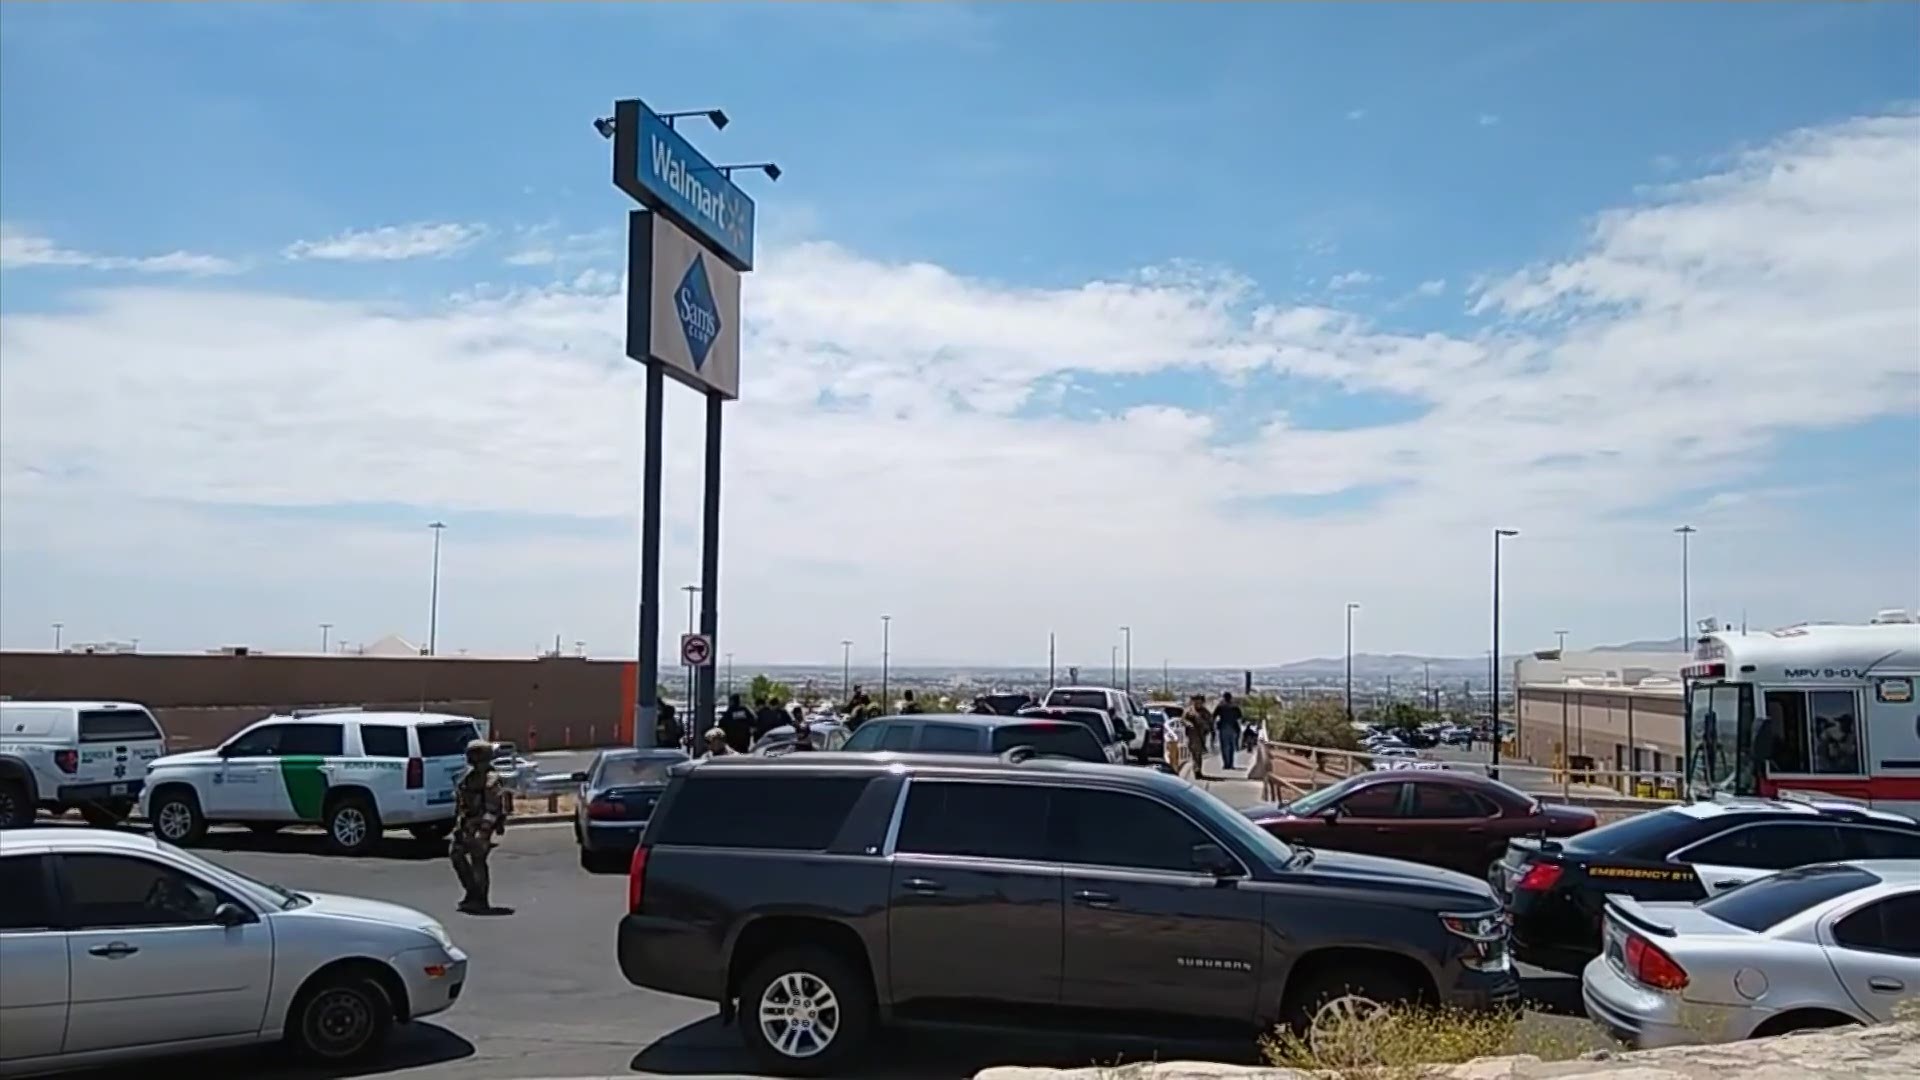 Multiple people were killed and at least one person was in custody after a shooter went on a rampage Saturday at a shopping mall, police in the Texas border town of El Paso said. (AP)